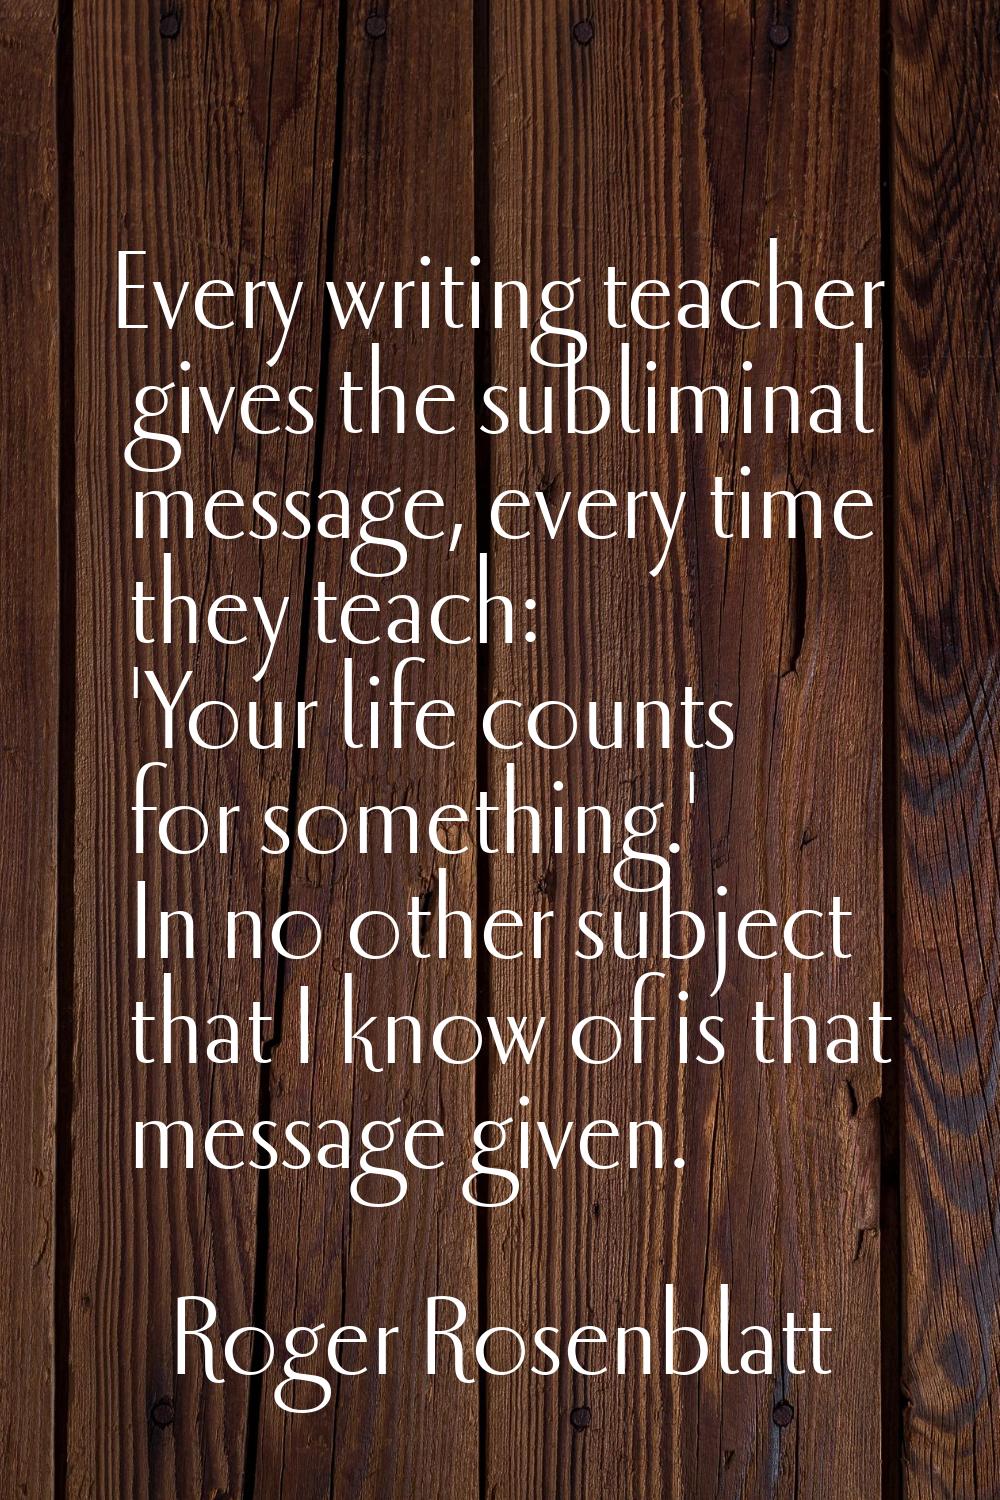 Every writing teacher gives the subliminal message, every time they teach: 'Your life counts for so